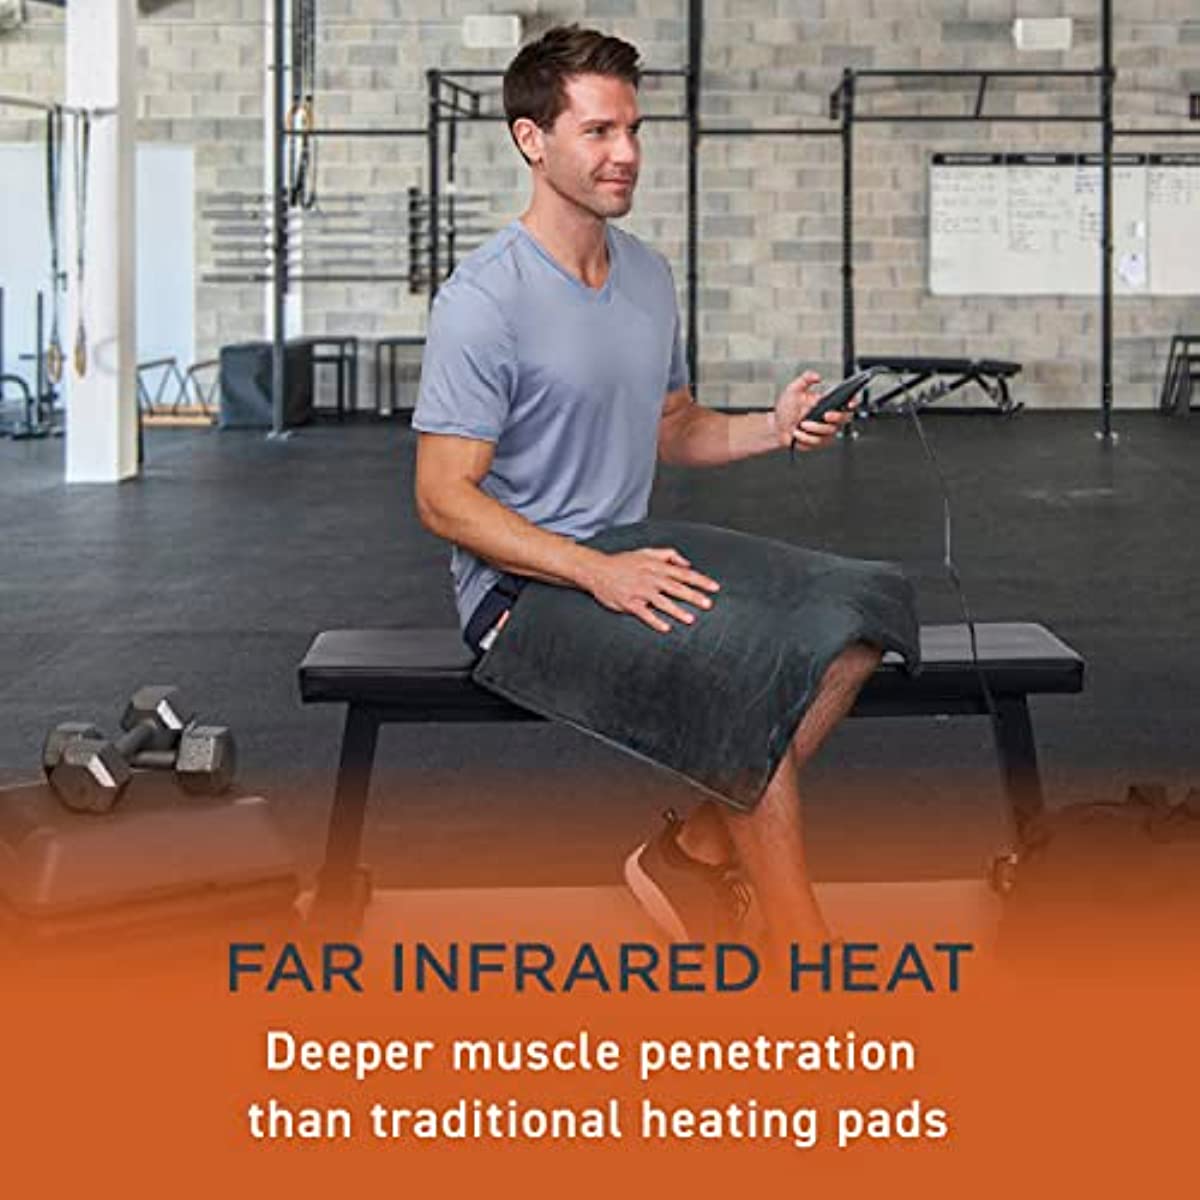 Pure Enrichment® PureRelief™ Pro Far Infrared Ultra-Wide Heating Pad - Deeper Muscle Relief for Back, Neck, Shoulder, & Knee Pain in Athletes, 4 Heat Settings, Dry/Moist Heat, 20” x 24” Wide Size